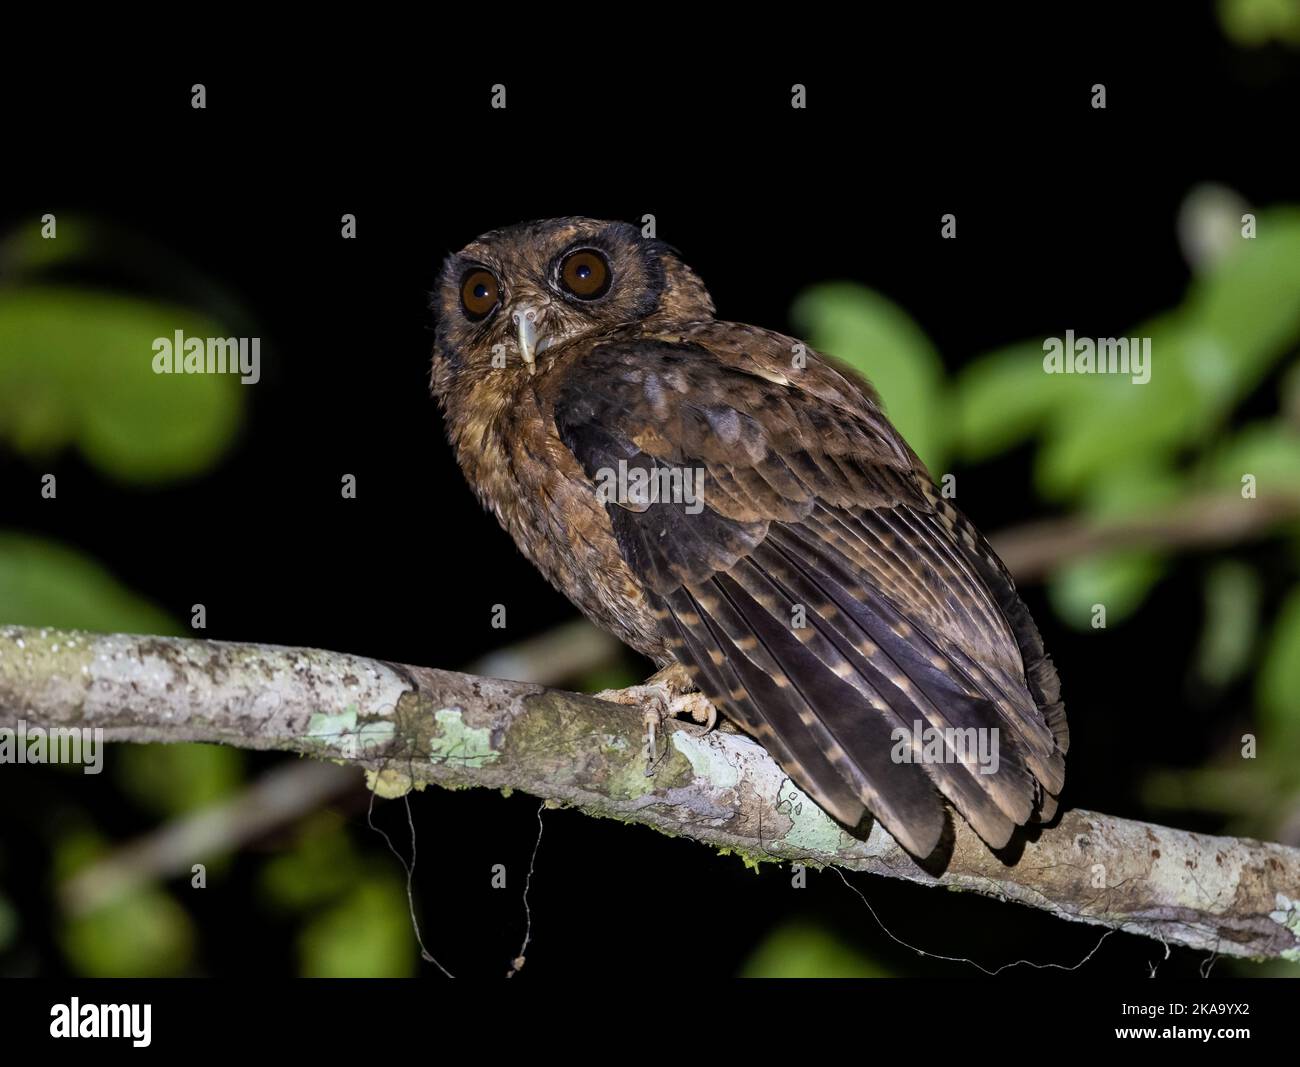 A Tawny-bellied Screech-Owl (Megascops watsonii) perched on a branch at night. Amazonia National Park, Pará State, Brazil. Stock Photo